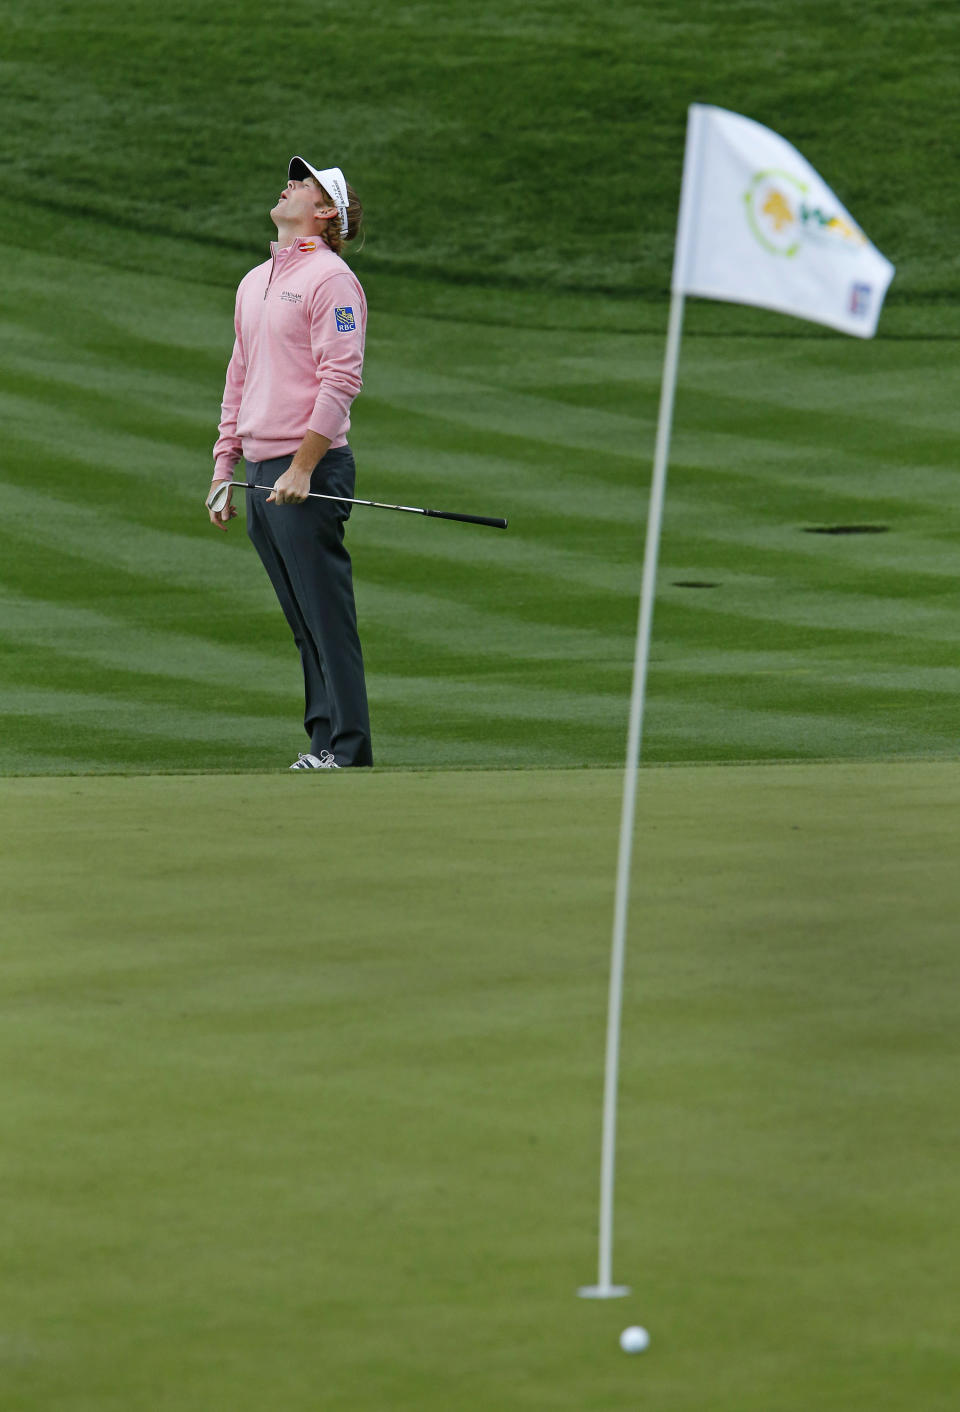 Brandt Snedeker reacts after narrowly missing his putt on the ninth green during the second round of the Phoenix Open golf tournament Friday, Jan. 31, 2014, in Scottsdale, Ariz. (AP Photo/The Arizona Republic, David Kadlubowski) MESA OUT MARICOPA COUNTY OUT MAGS OUT NO SALES